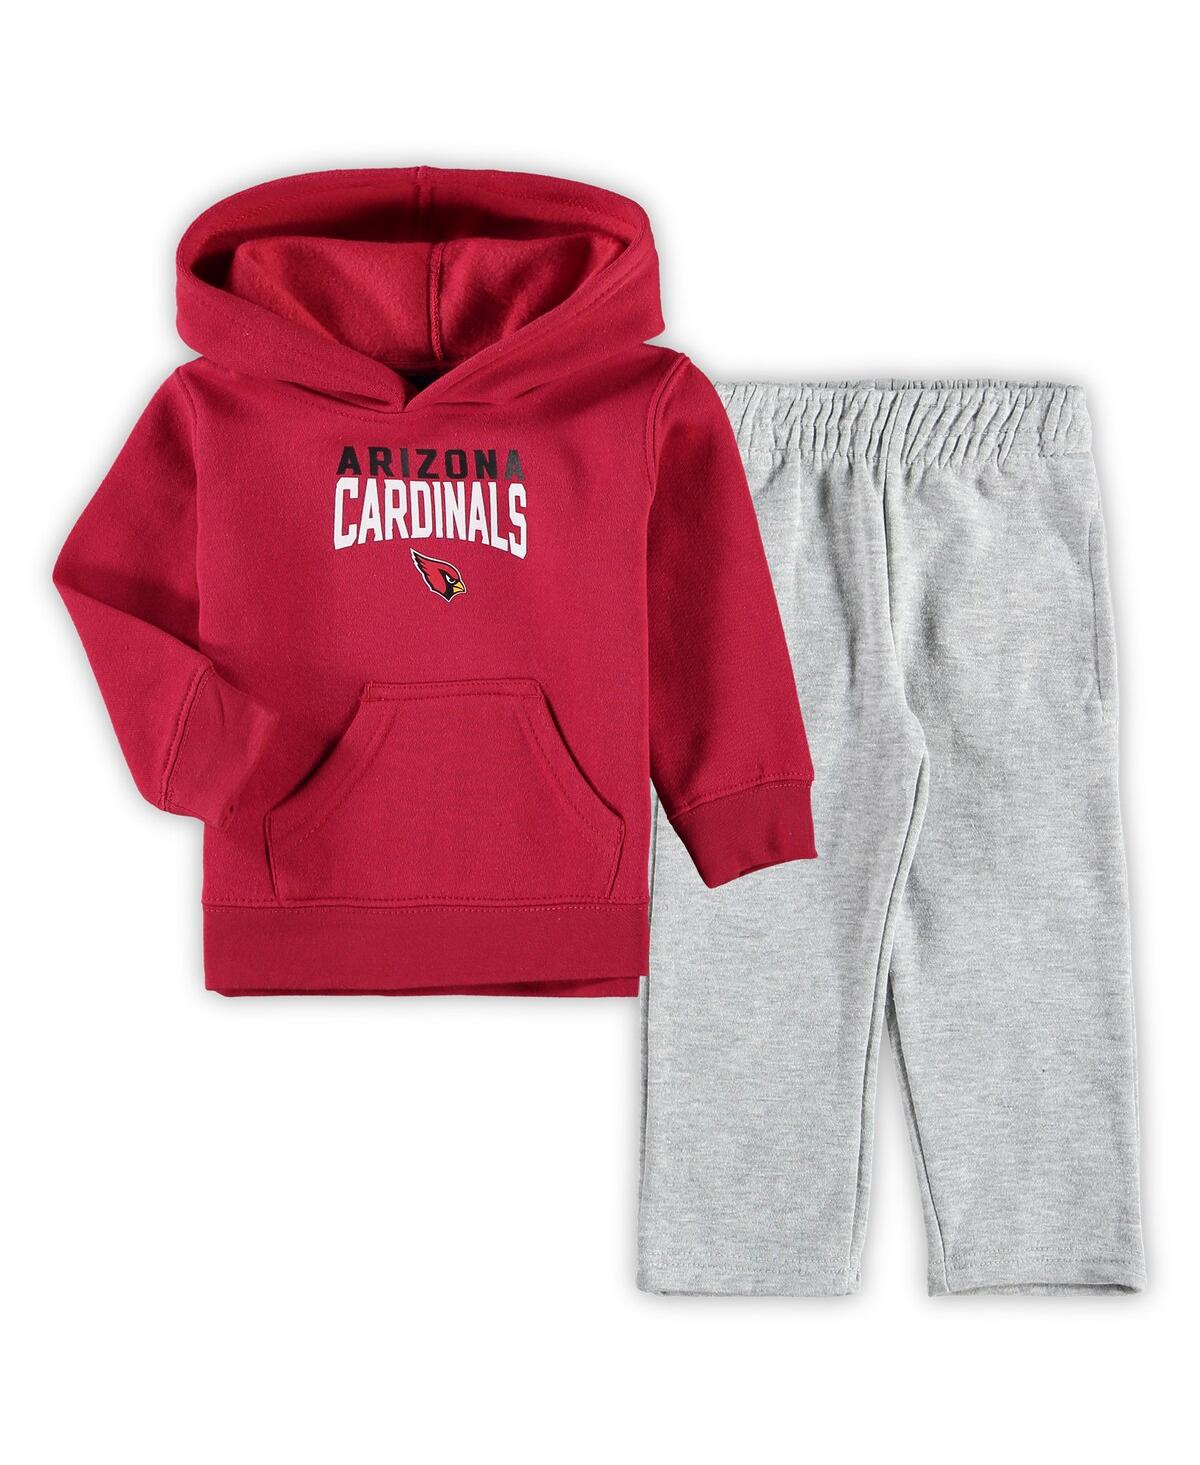 Outerstuff Babies' Toddler Boys Cardinal, Heathered Gray Arizona Cardinals Fan Flare Pullover Hoodie And Sweatpants Set In Cardinal,heathered Gray